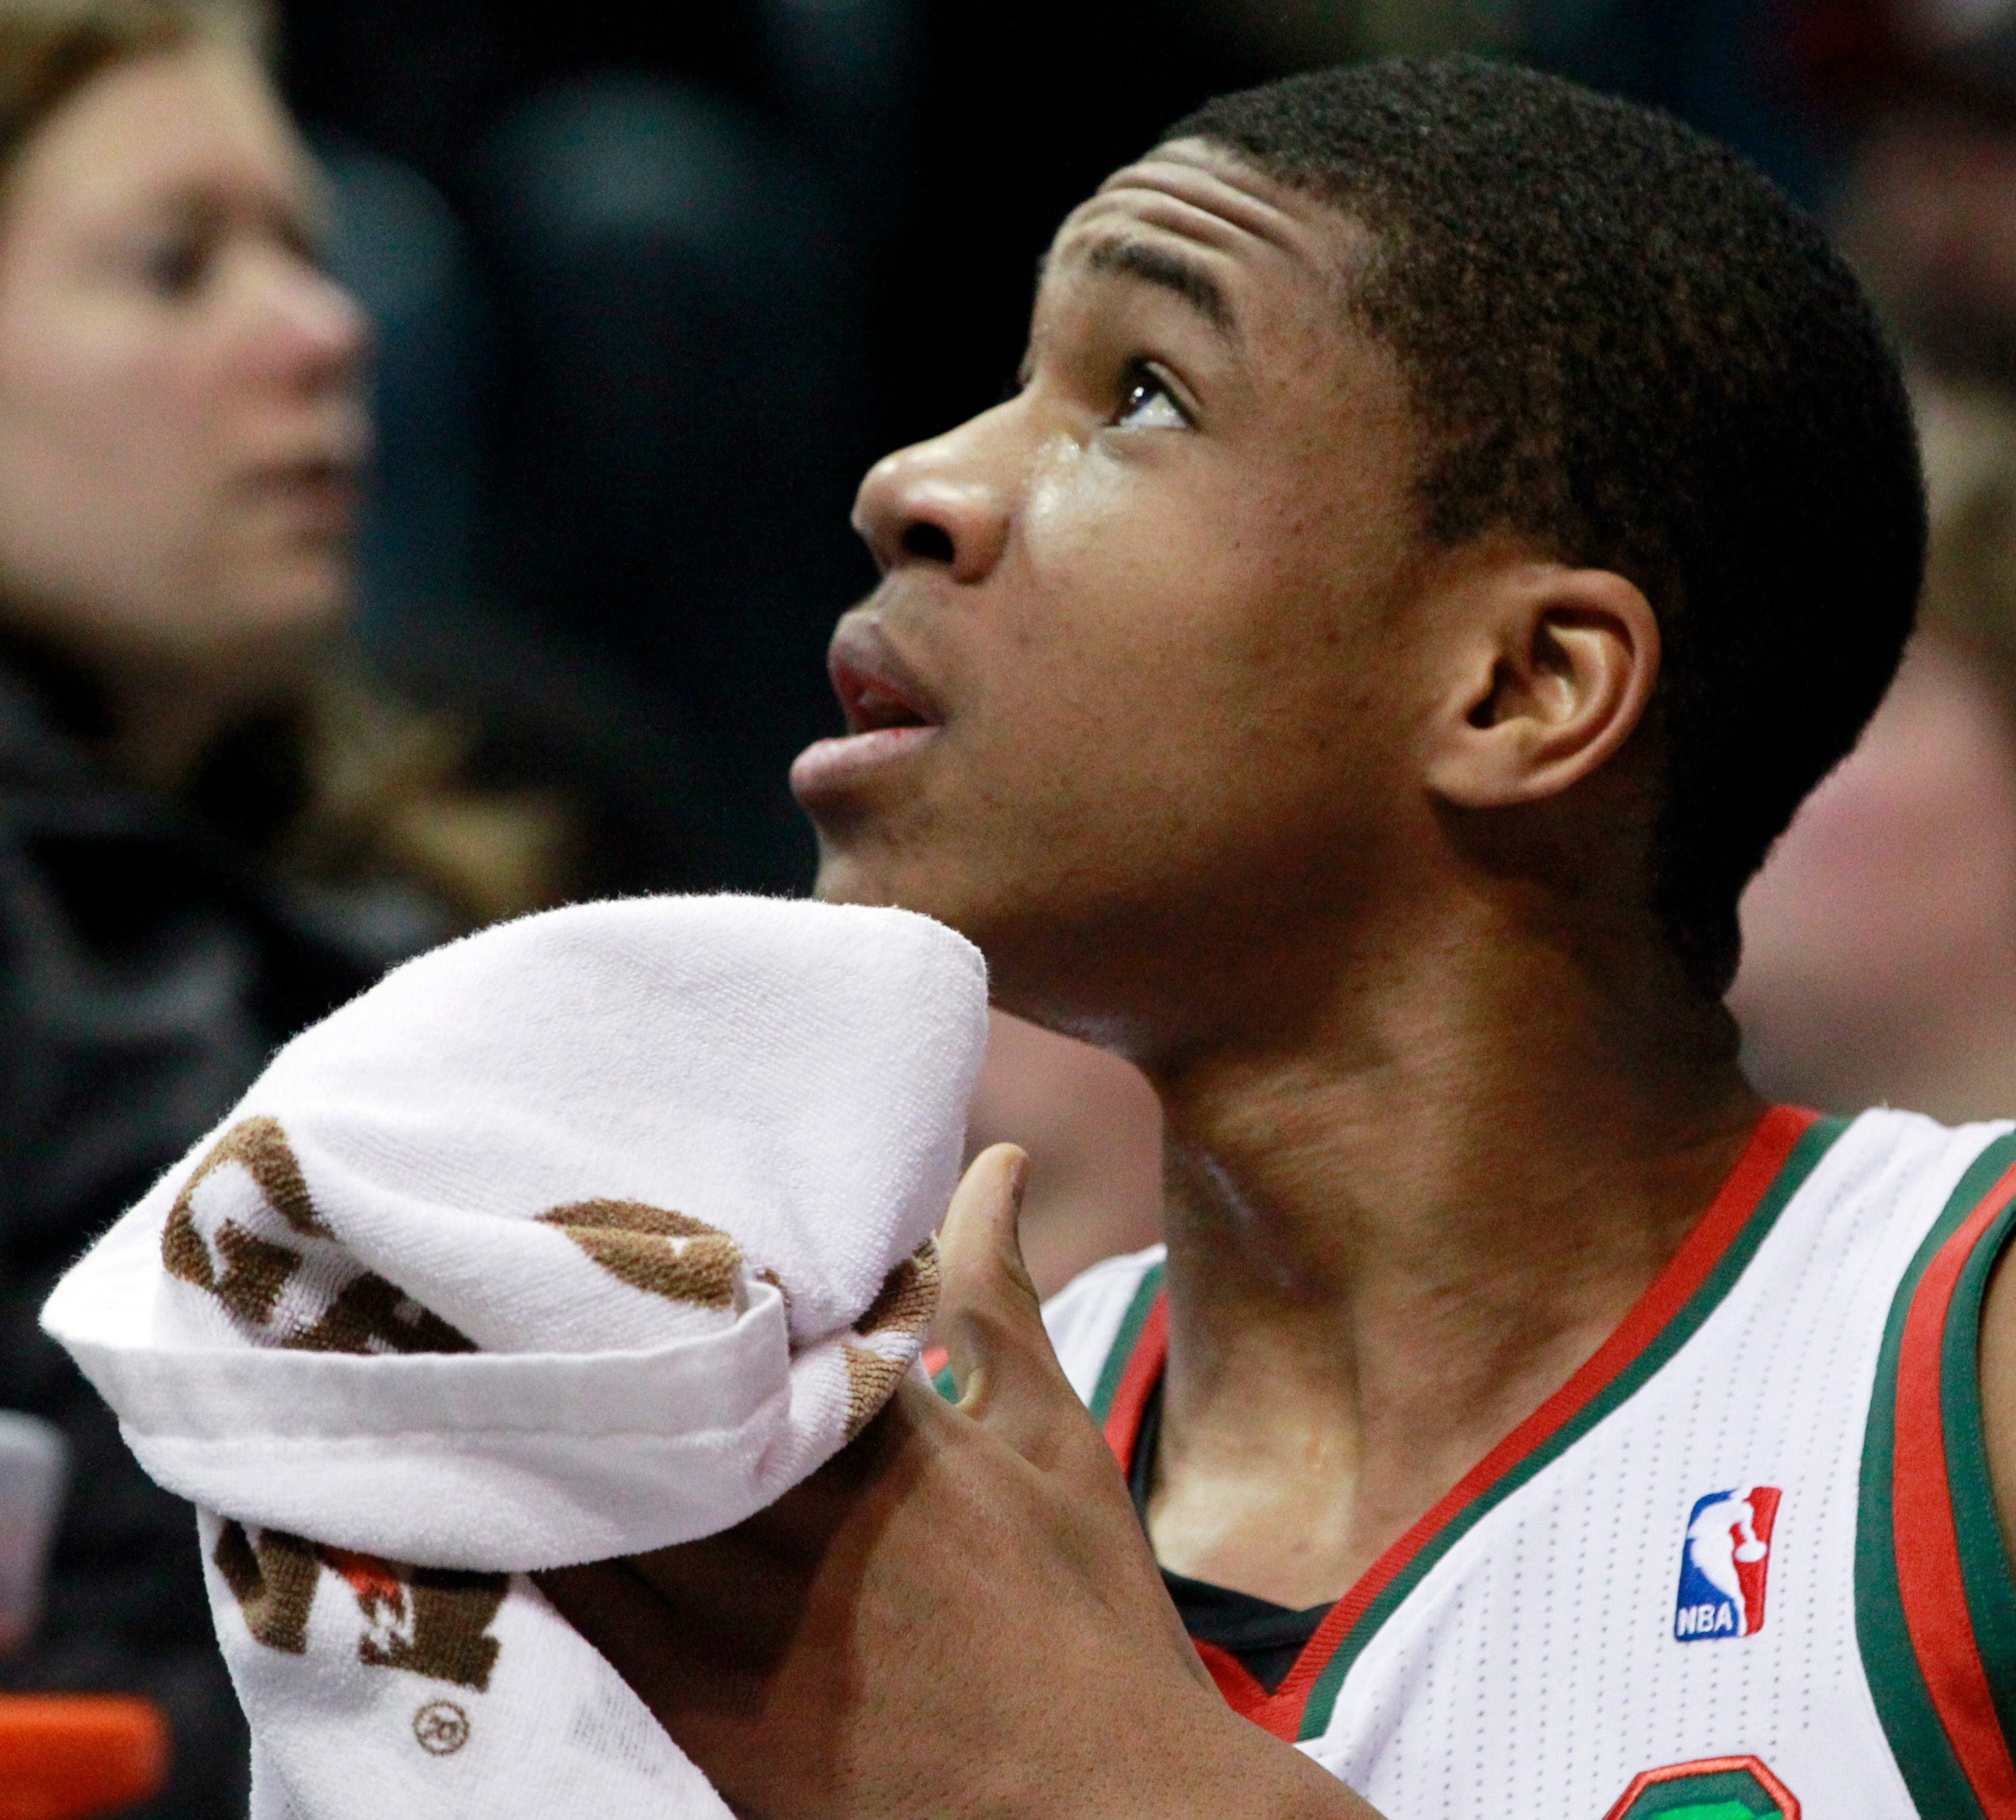 Giannis Antetokounmpo had a productive rookie season but was distracted at times by missing his family.